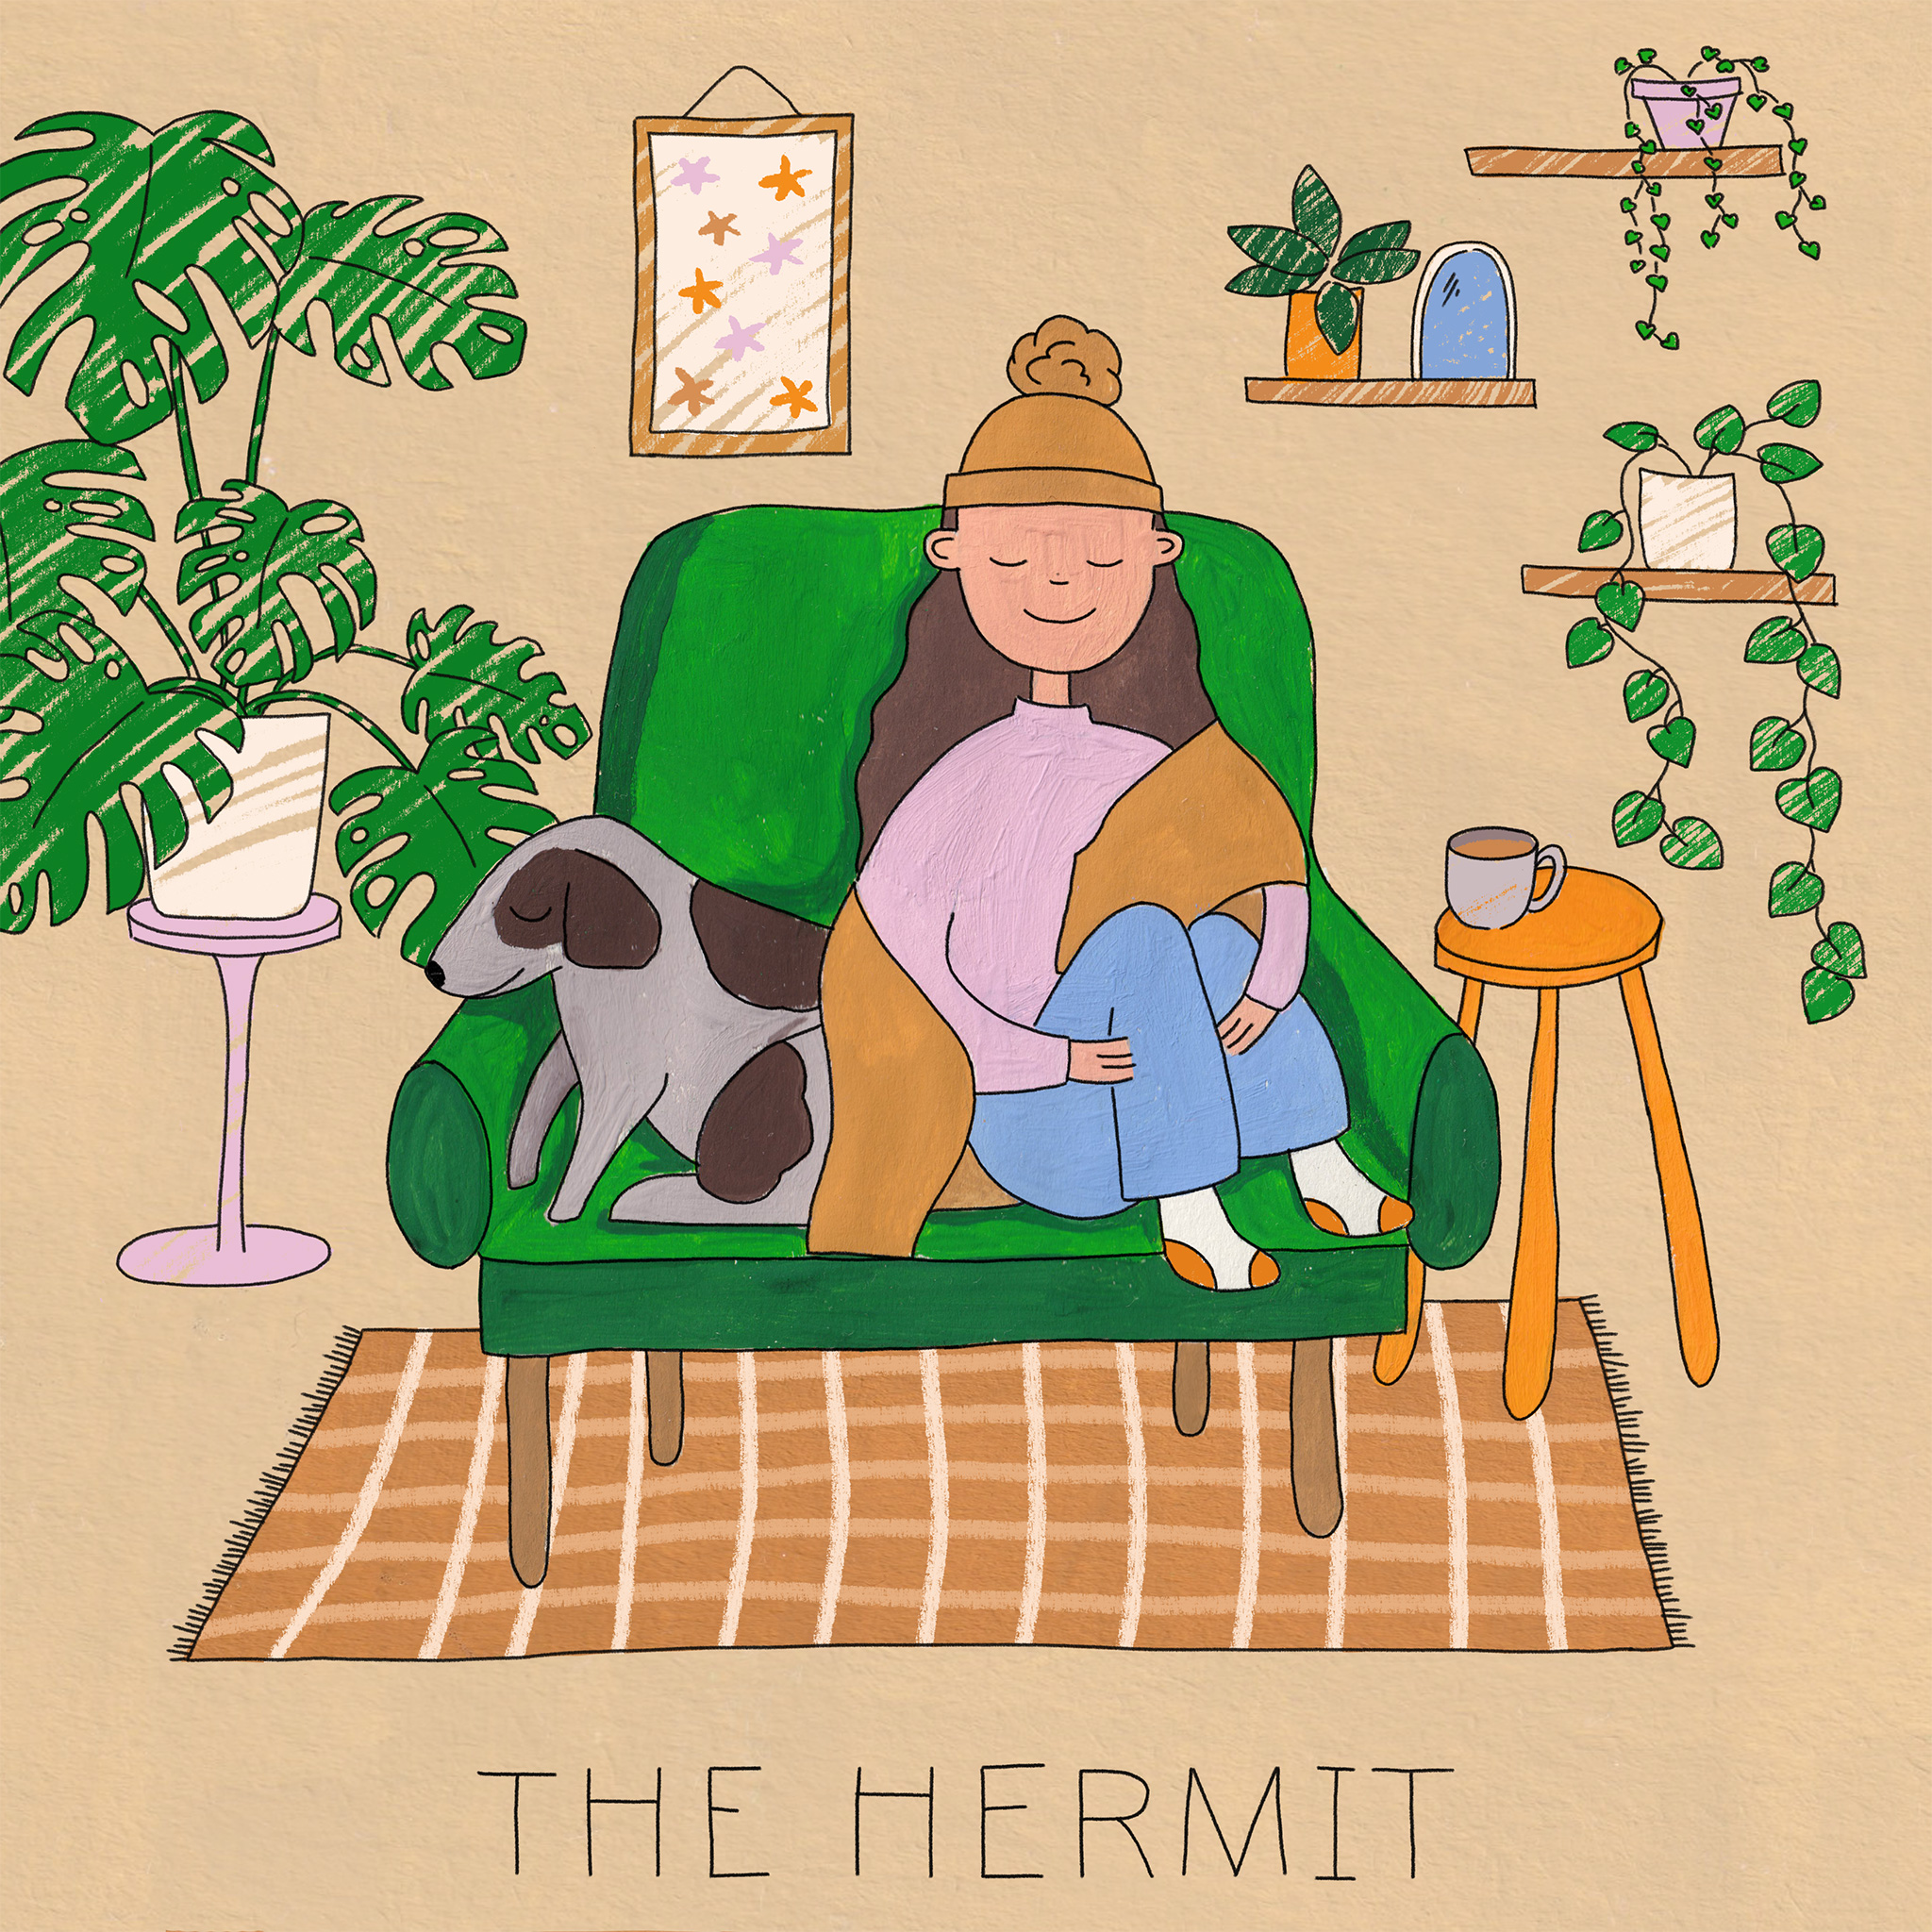 Woman sitting on a couch with a dog. Text: The Hermit